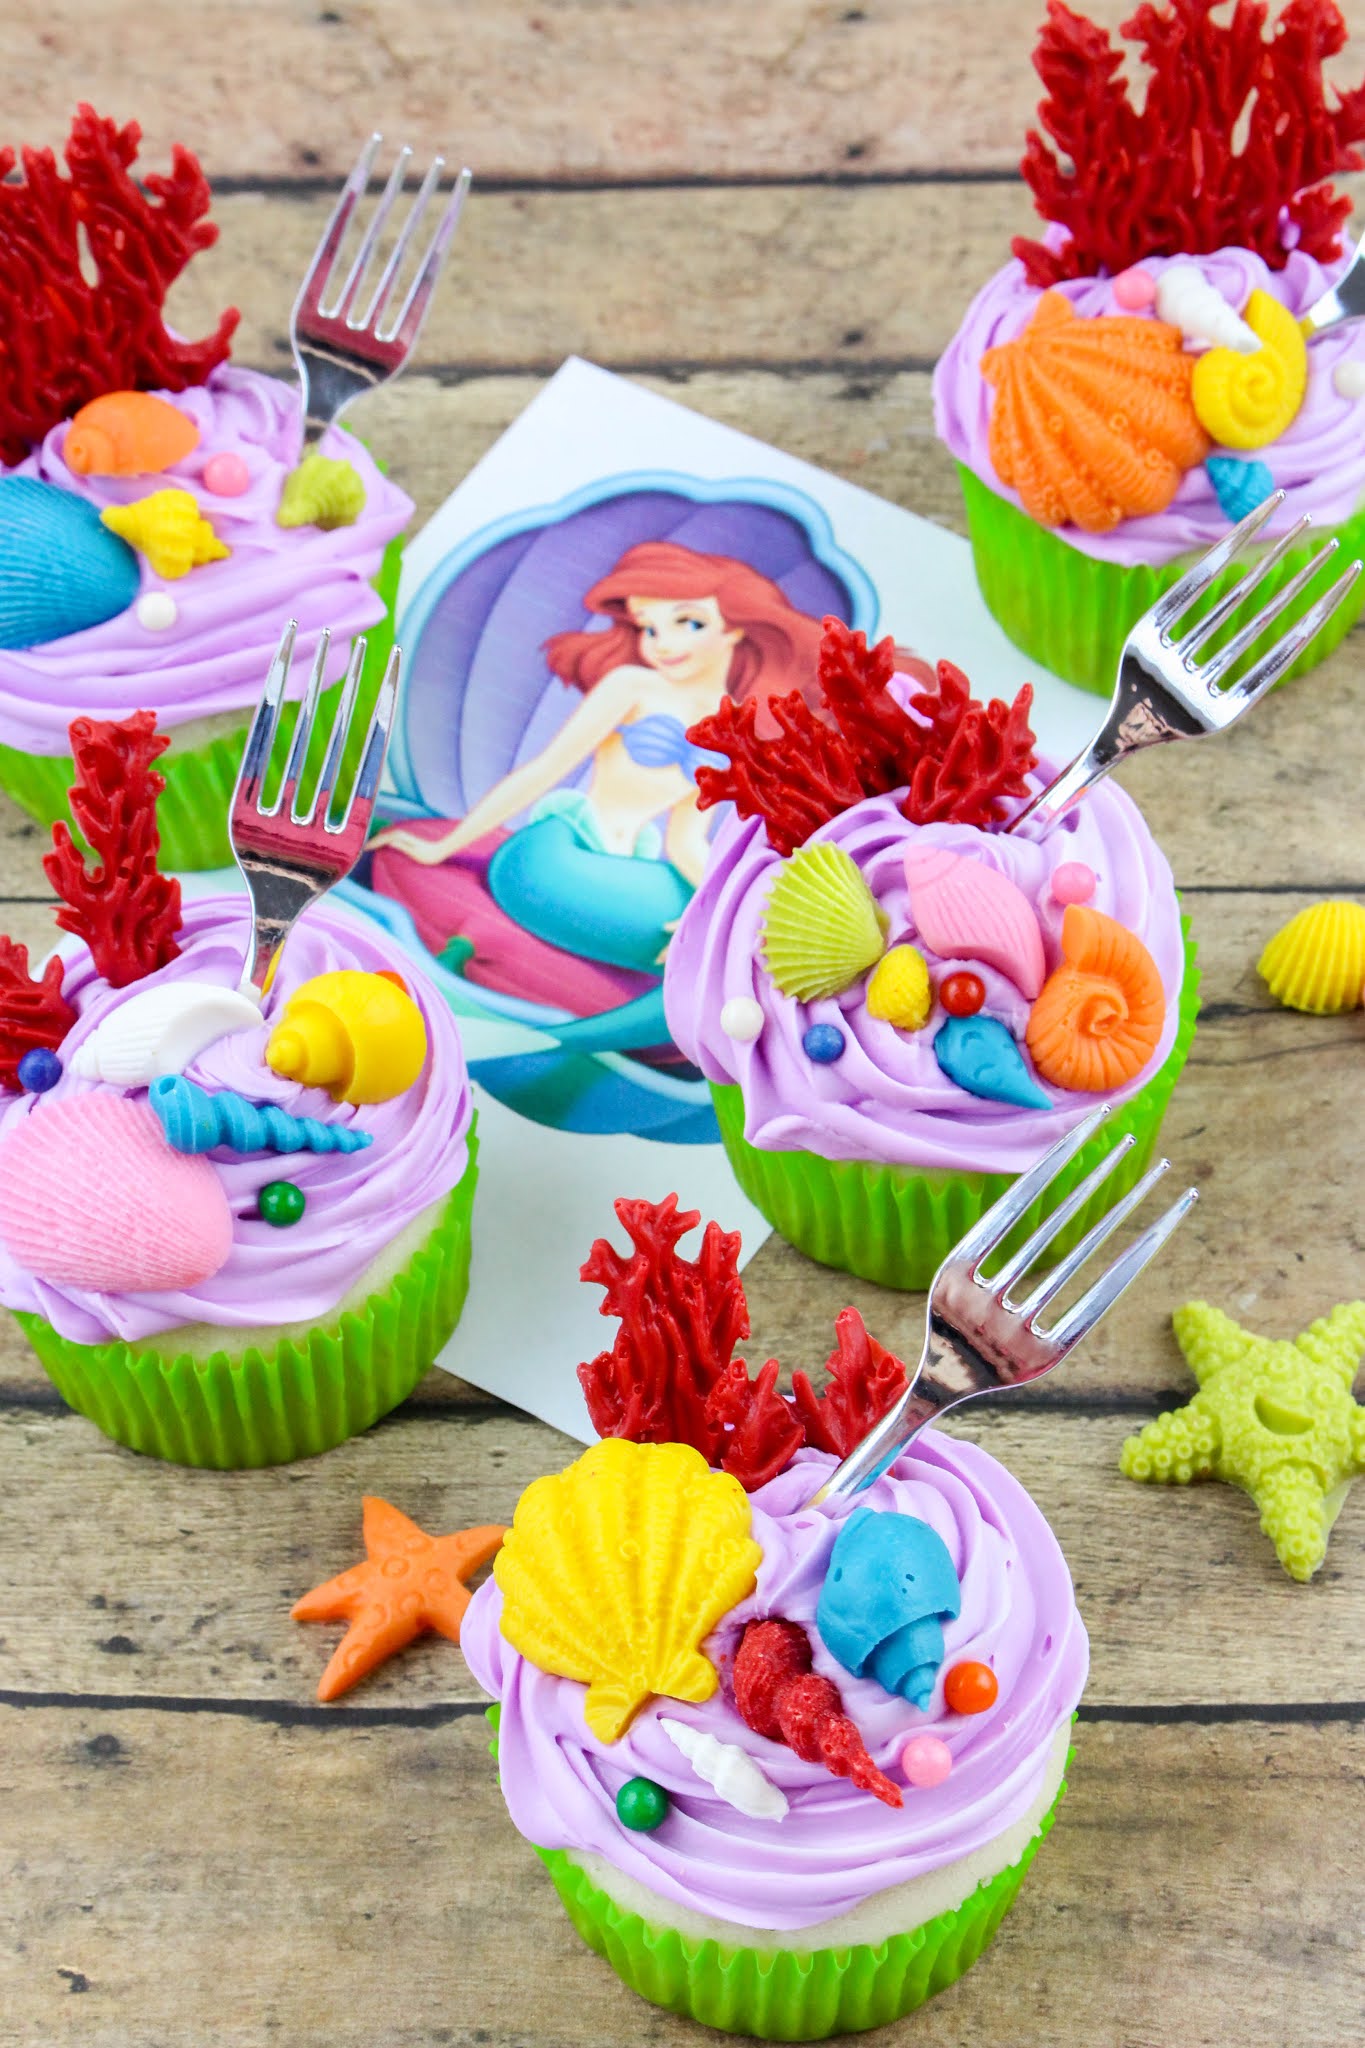 How To Make Disney Princess Ariel Little Mermaid Cupcakes With Dinglehopper Toppers